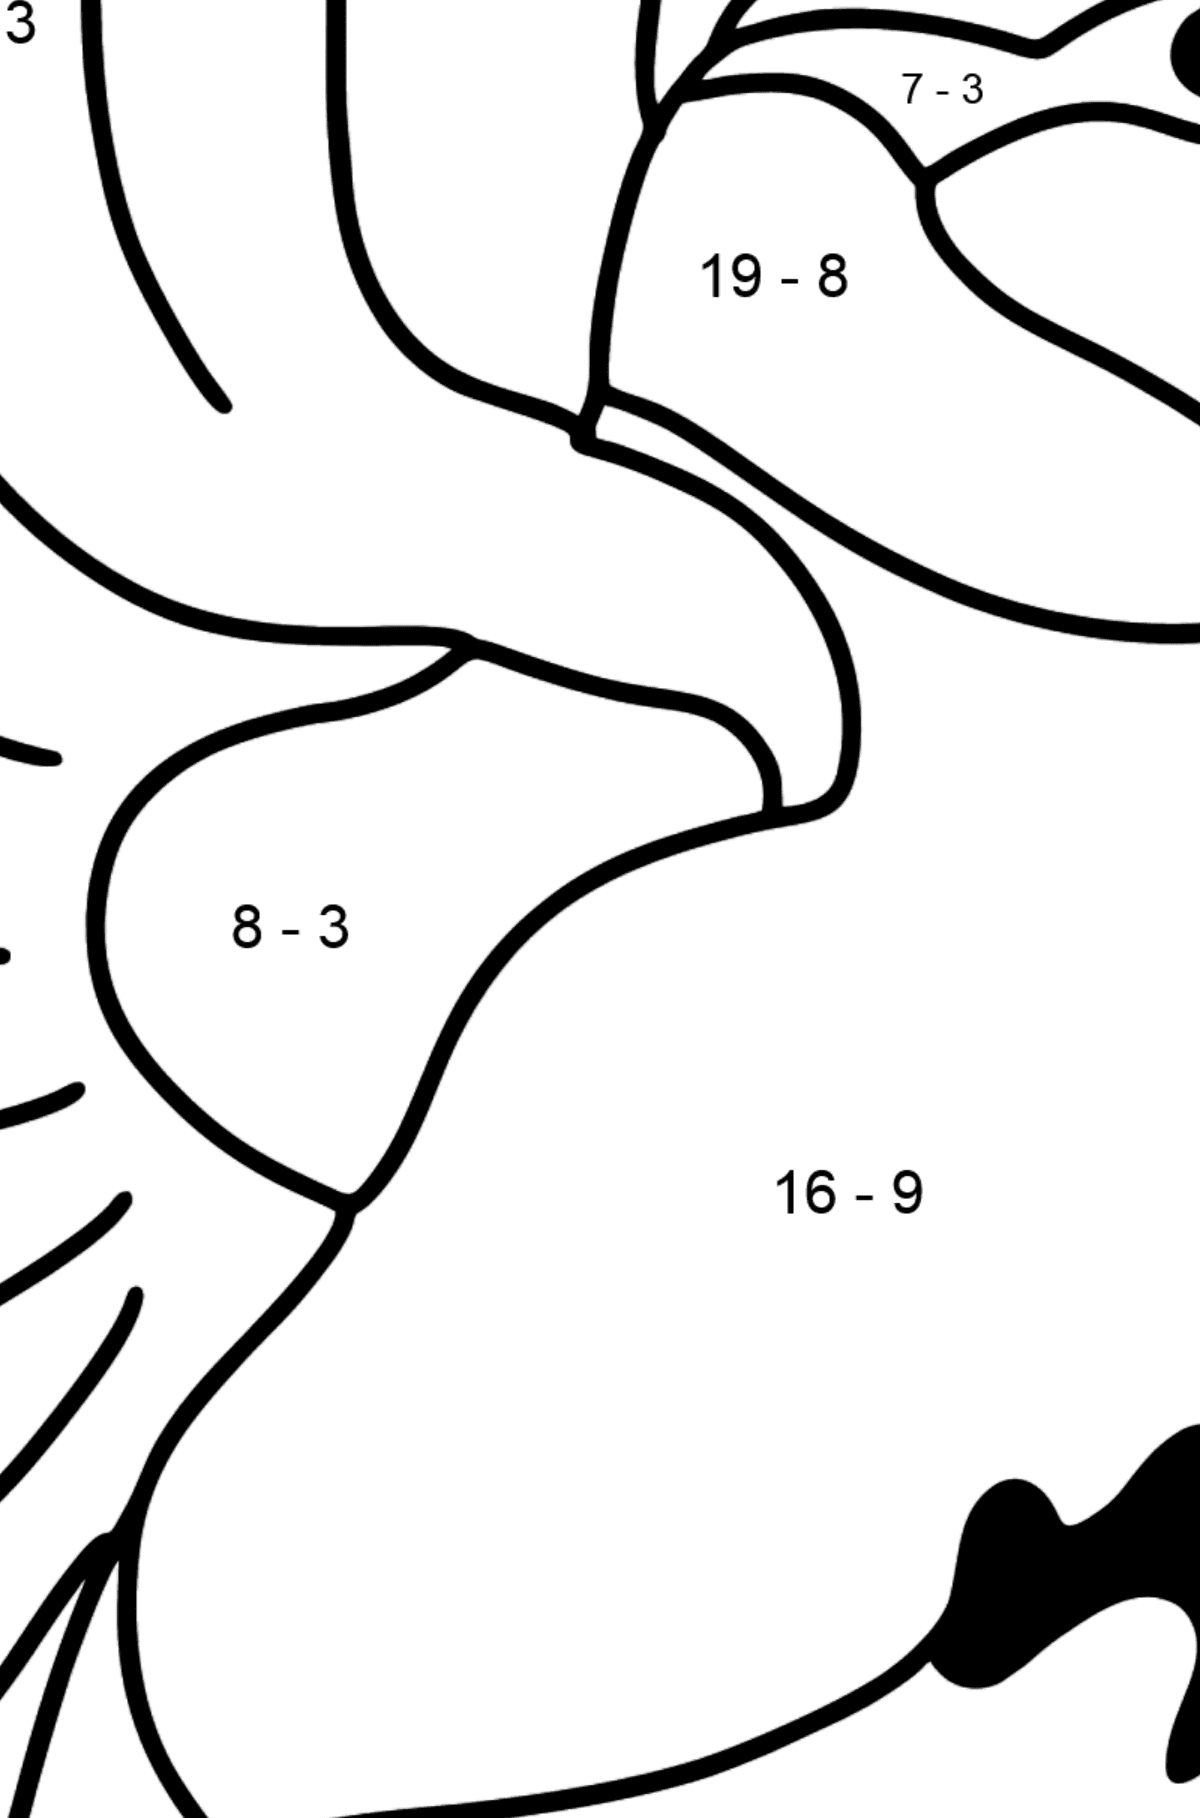 Tit coloring page - Math Coloring - Subtraction for Kids